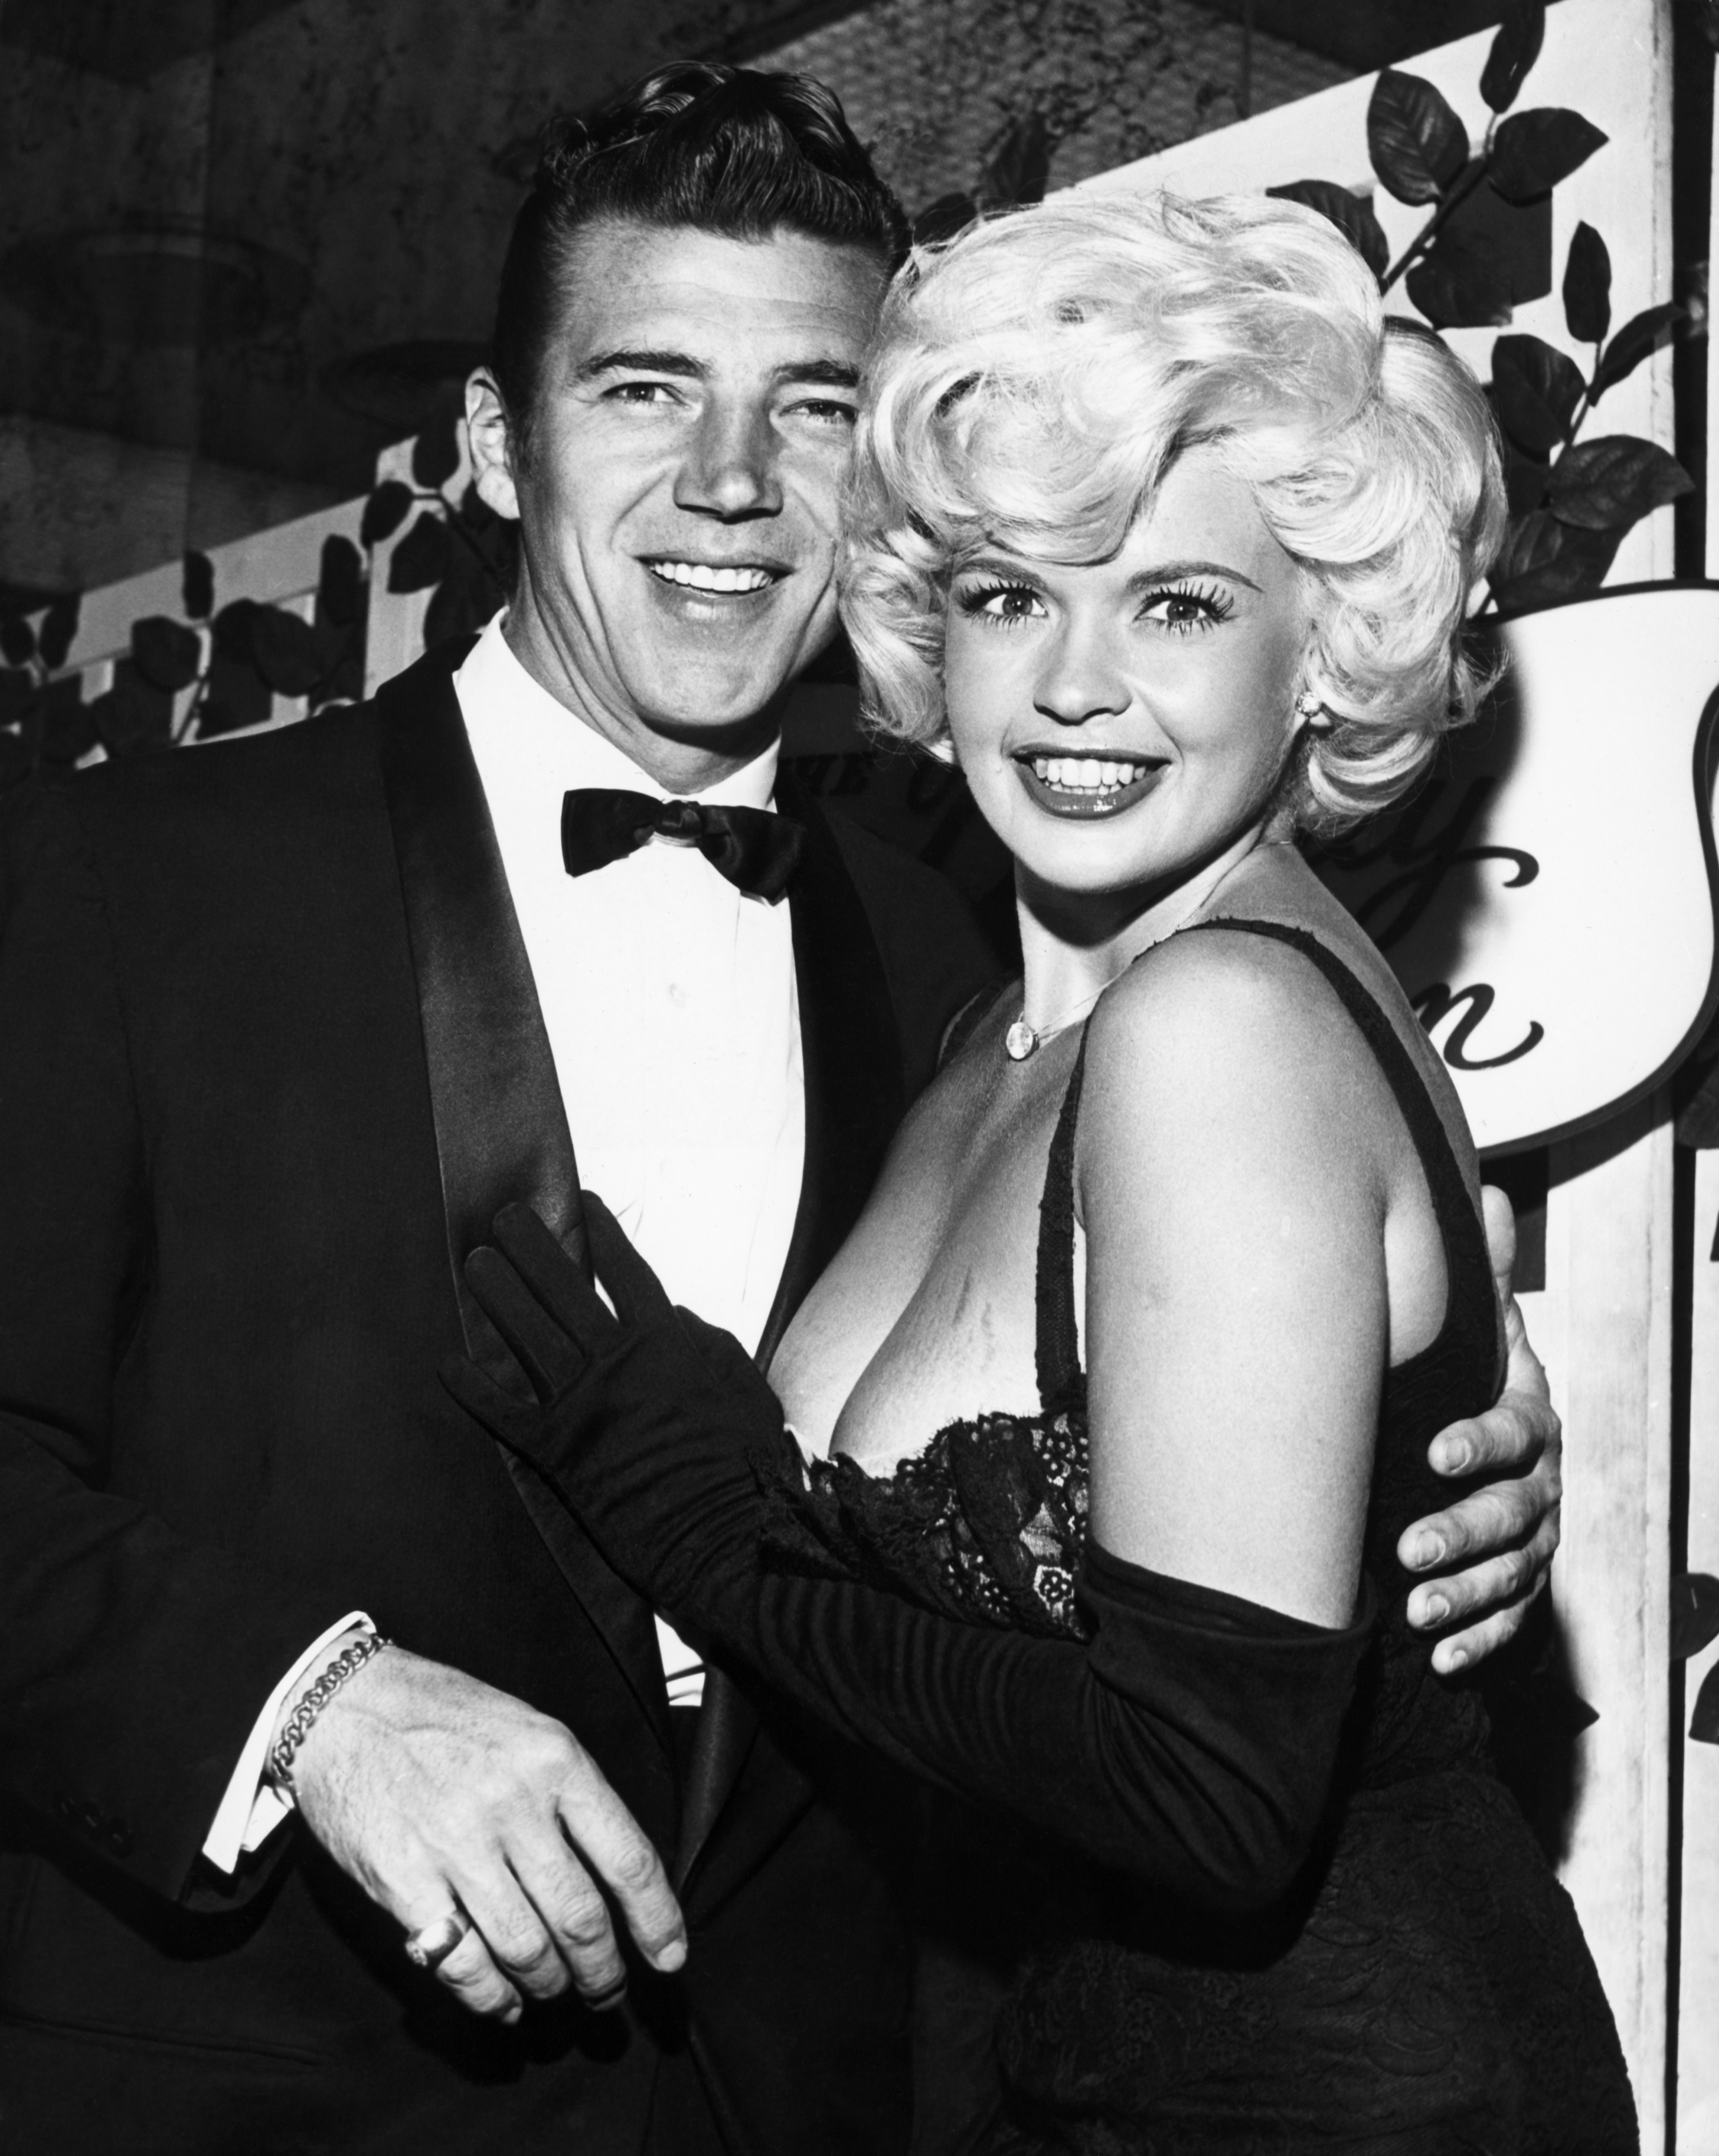 Mickey Hargitay and Jayne Mansfield posing together in an undated photograph | Source: Getty Images